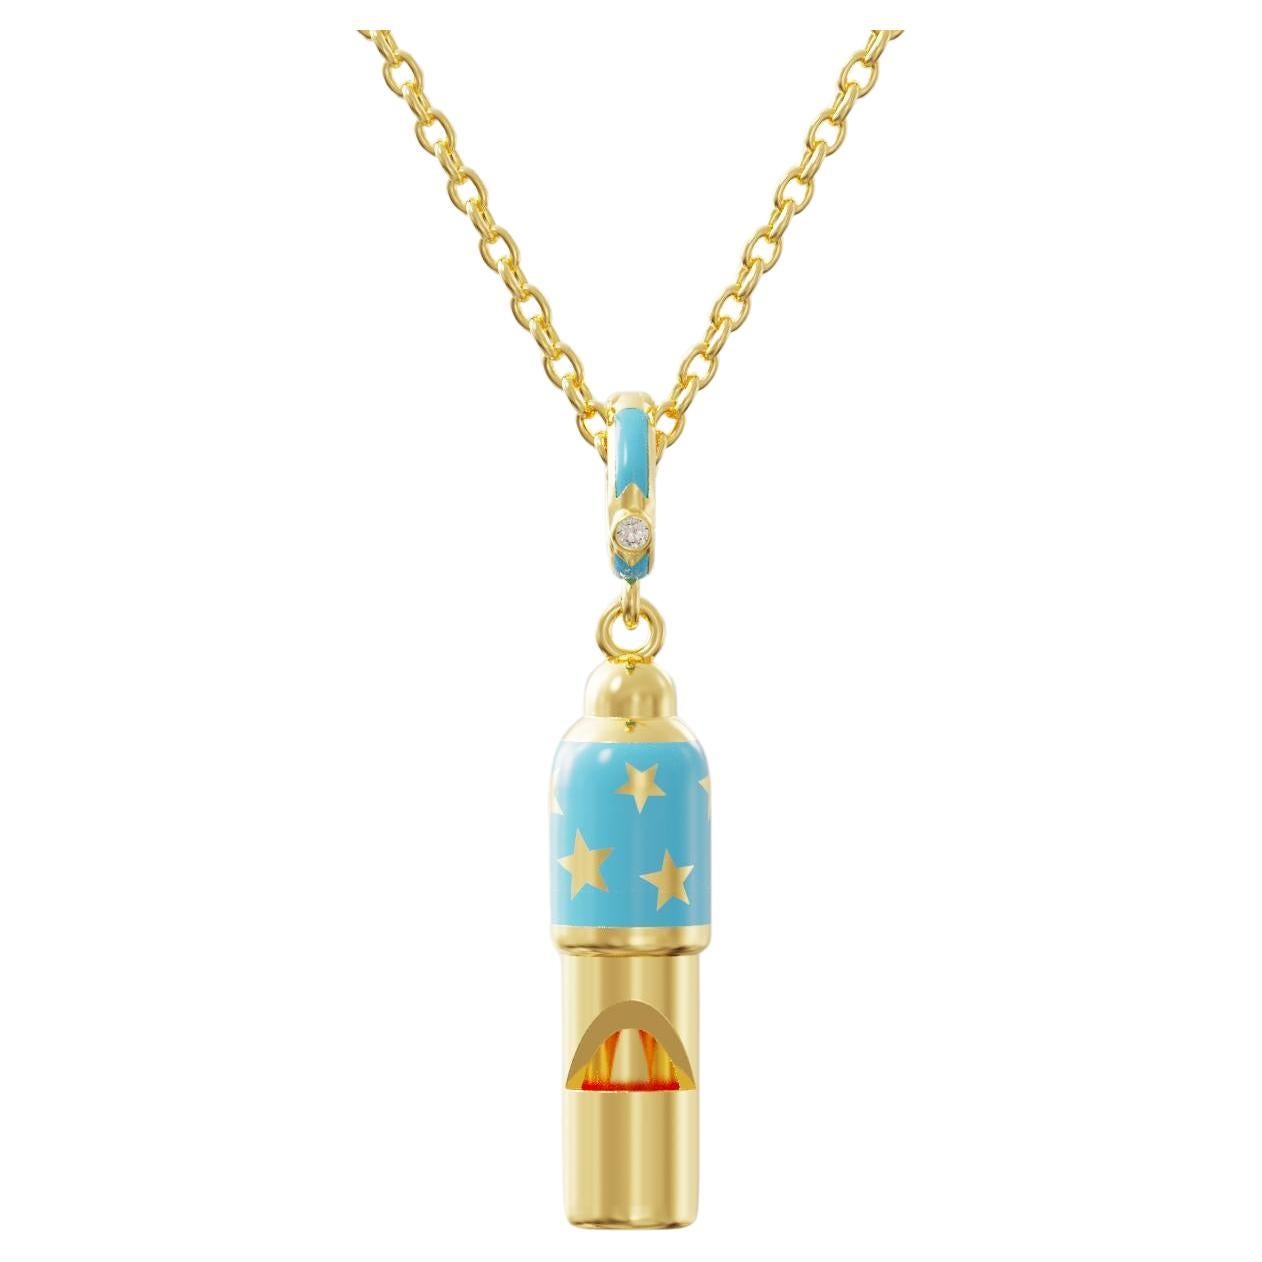 Small Gold Whistle Pendant Necklace, Blue Enamel For Sale